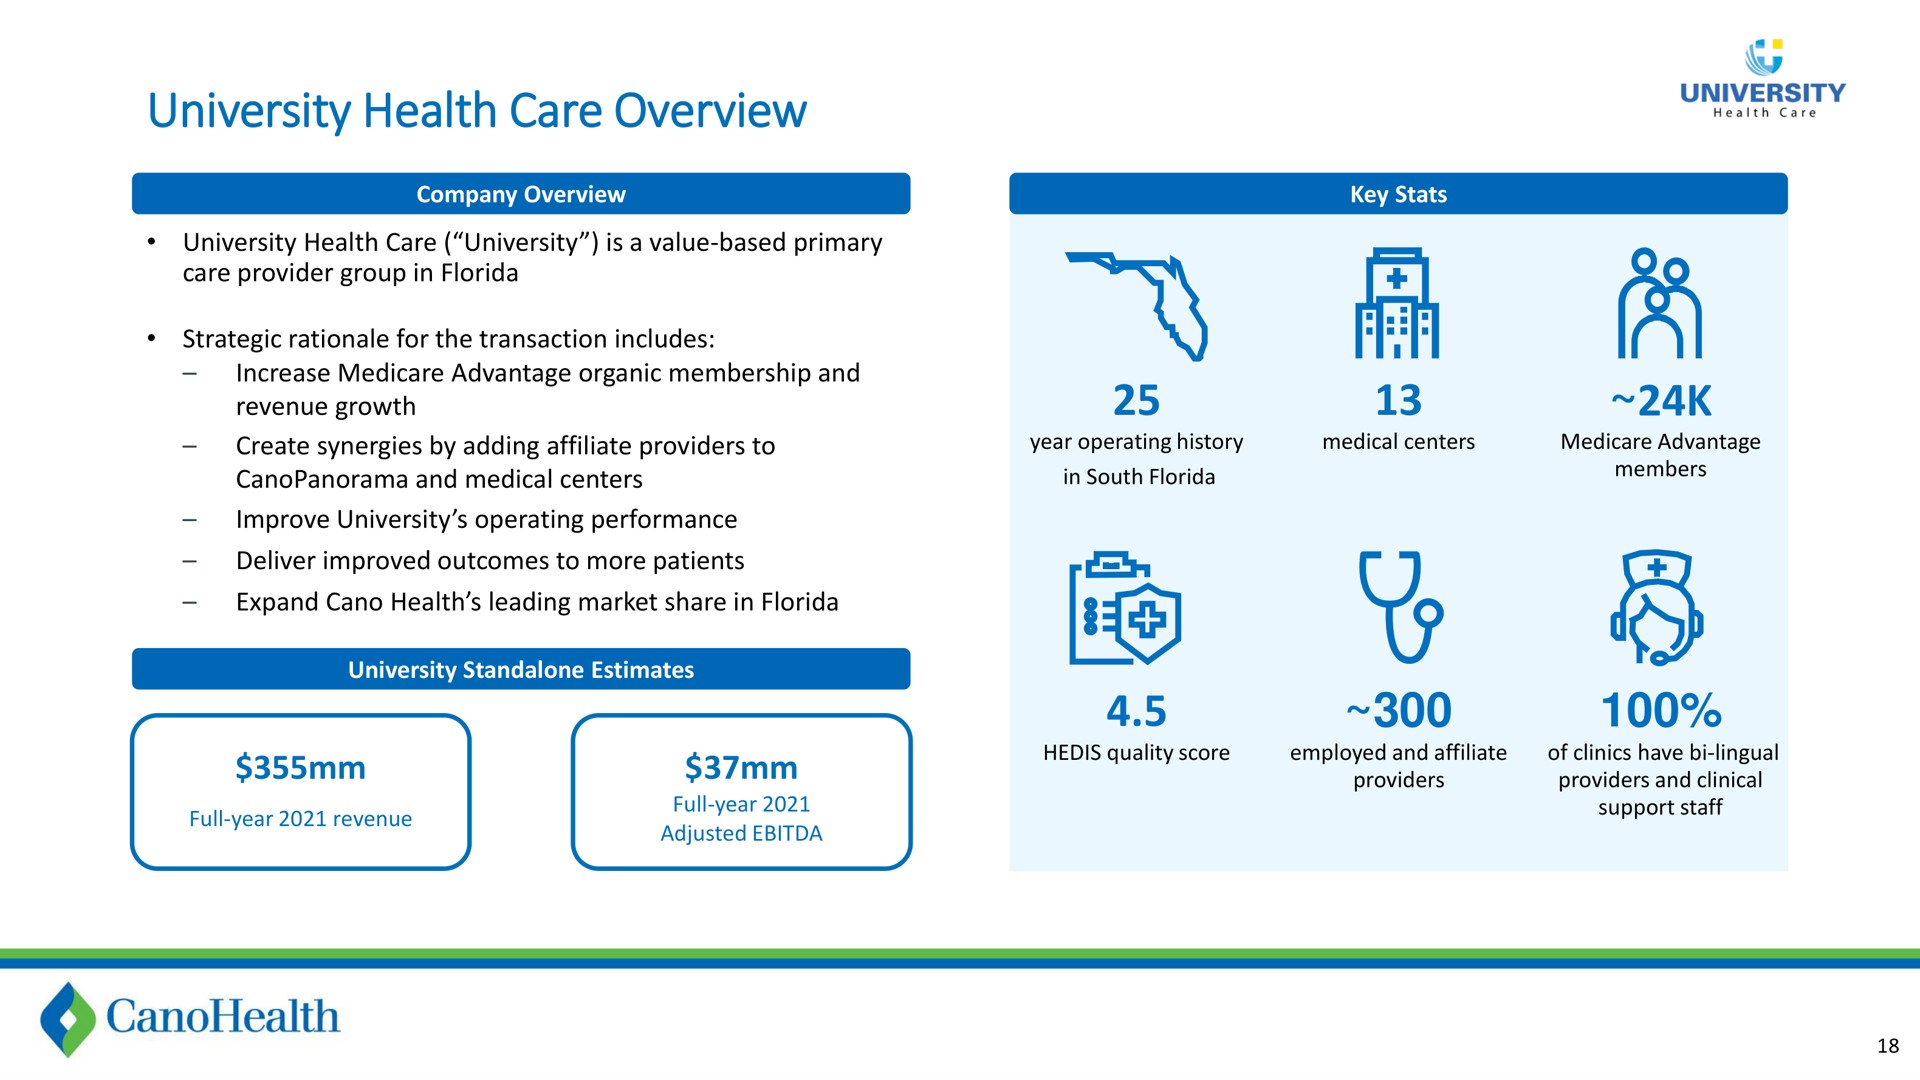 university health care overview | Cano Health